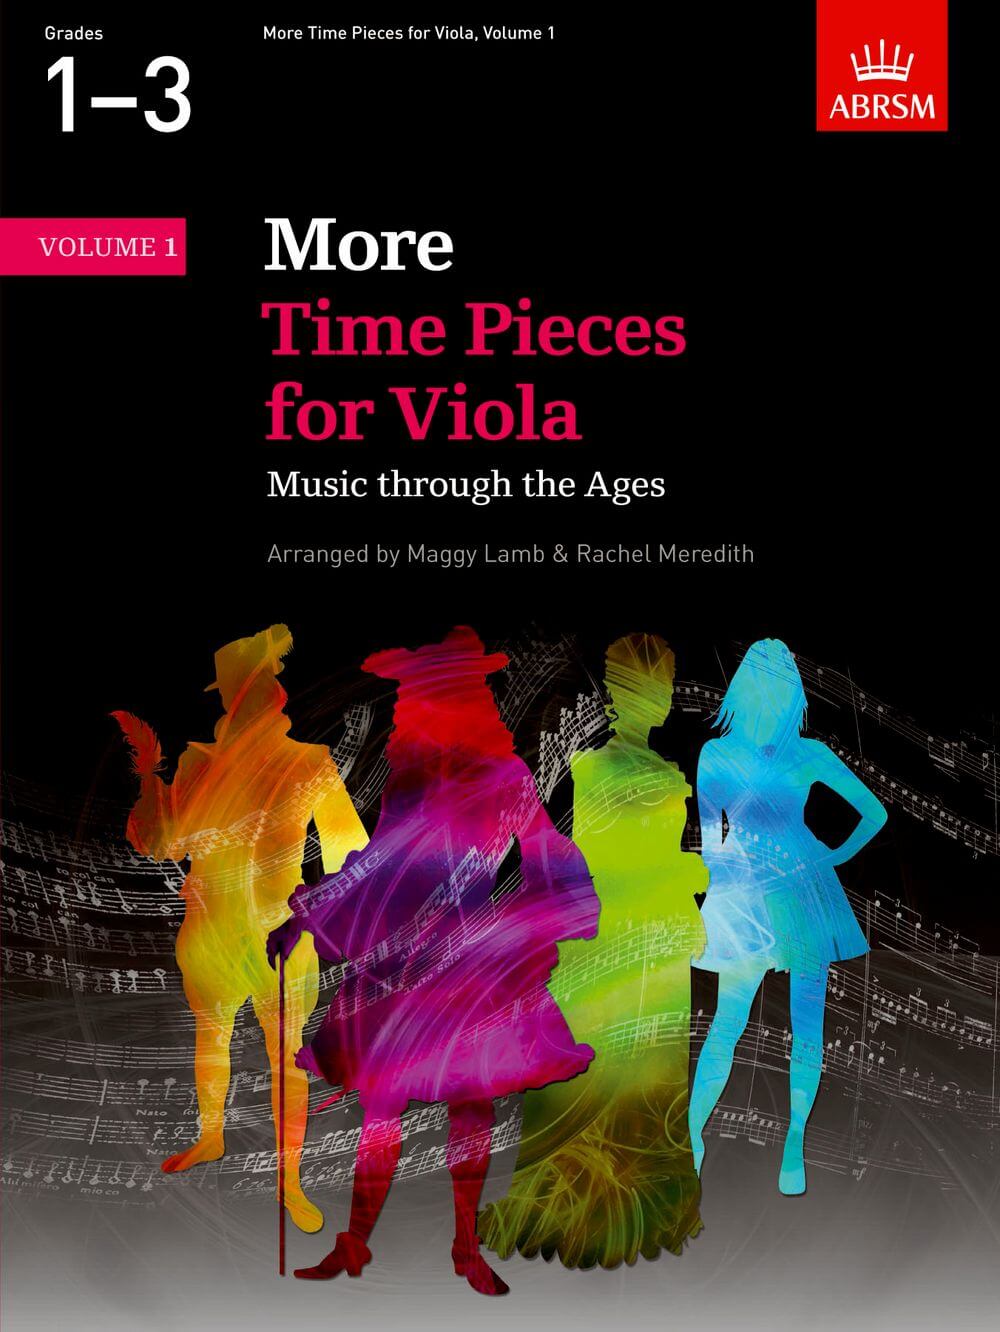 ABRSM More Time Pieces for Viola, Volume 1